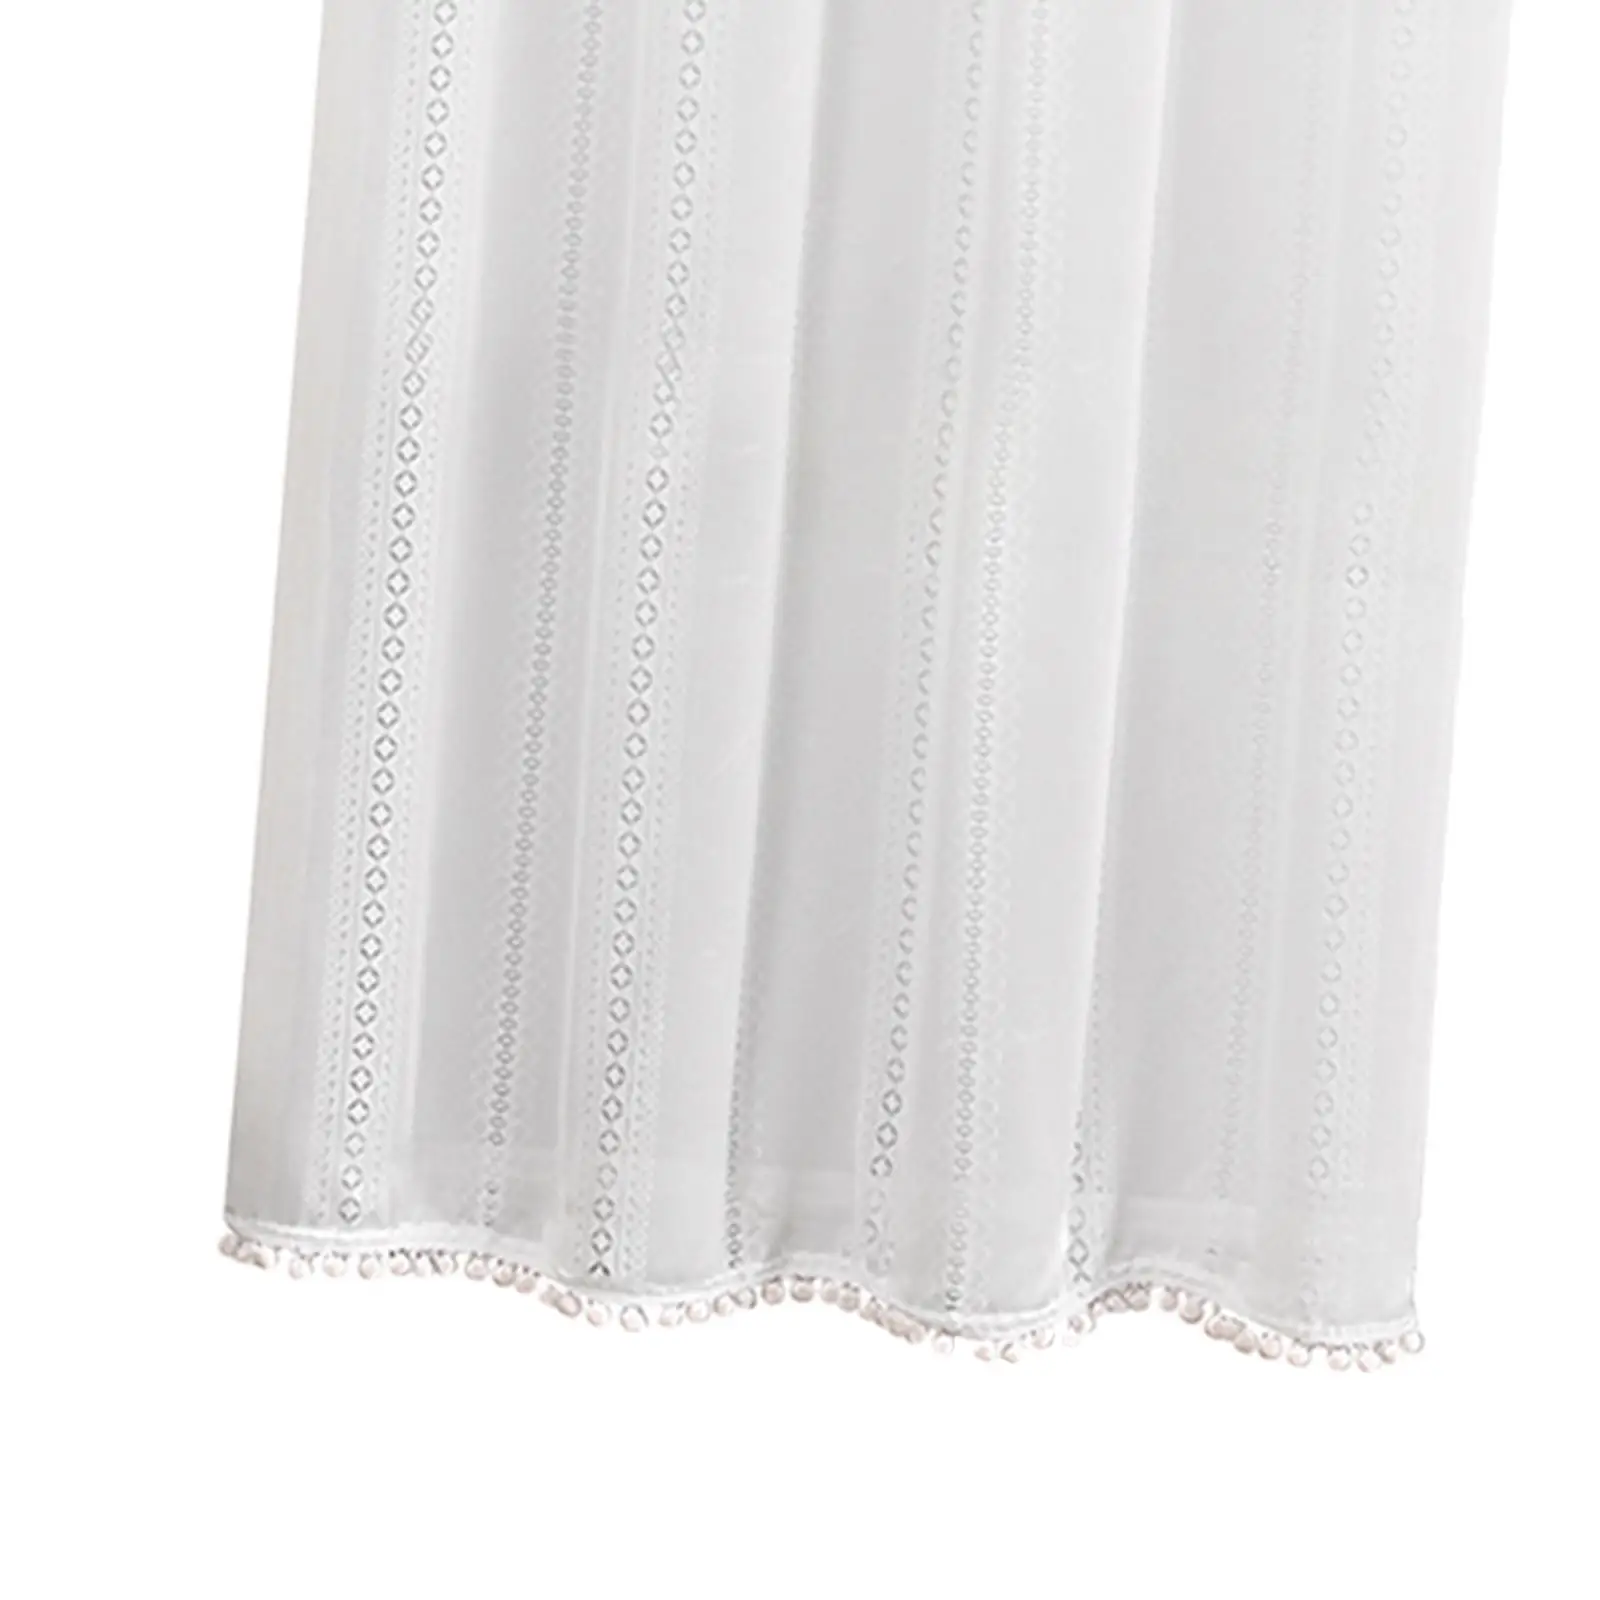 Elegant Sheer Voile Blinds Curtain White Tulle Curtains Window Tulle Curtains for Home Living Room Window Kitchen Decoration